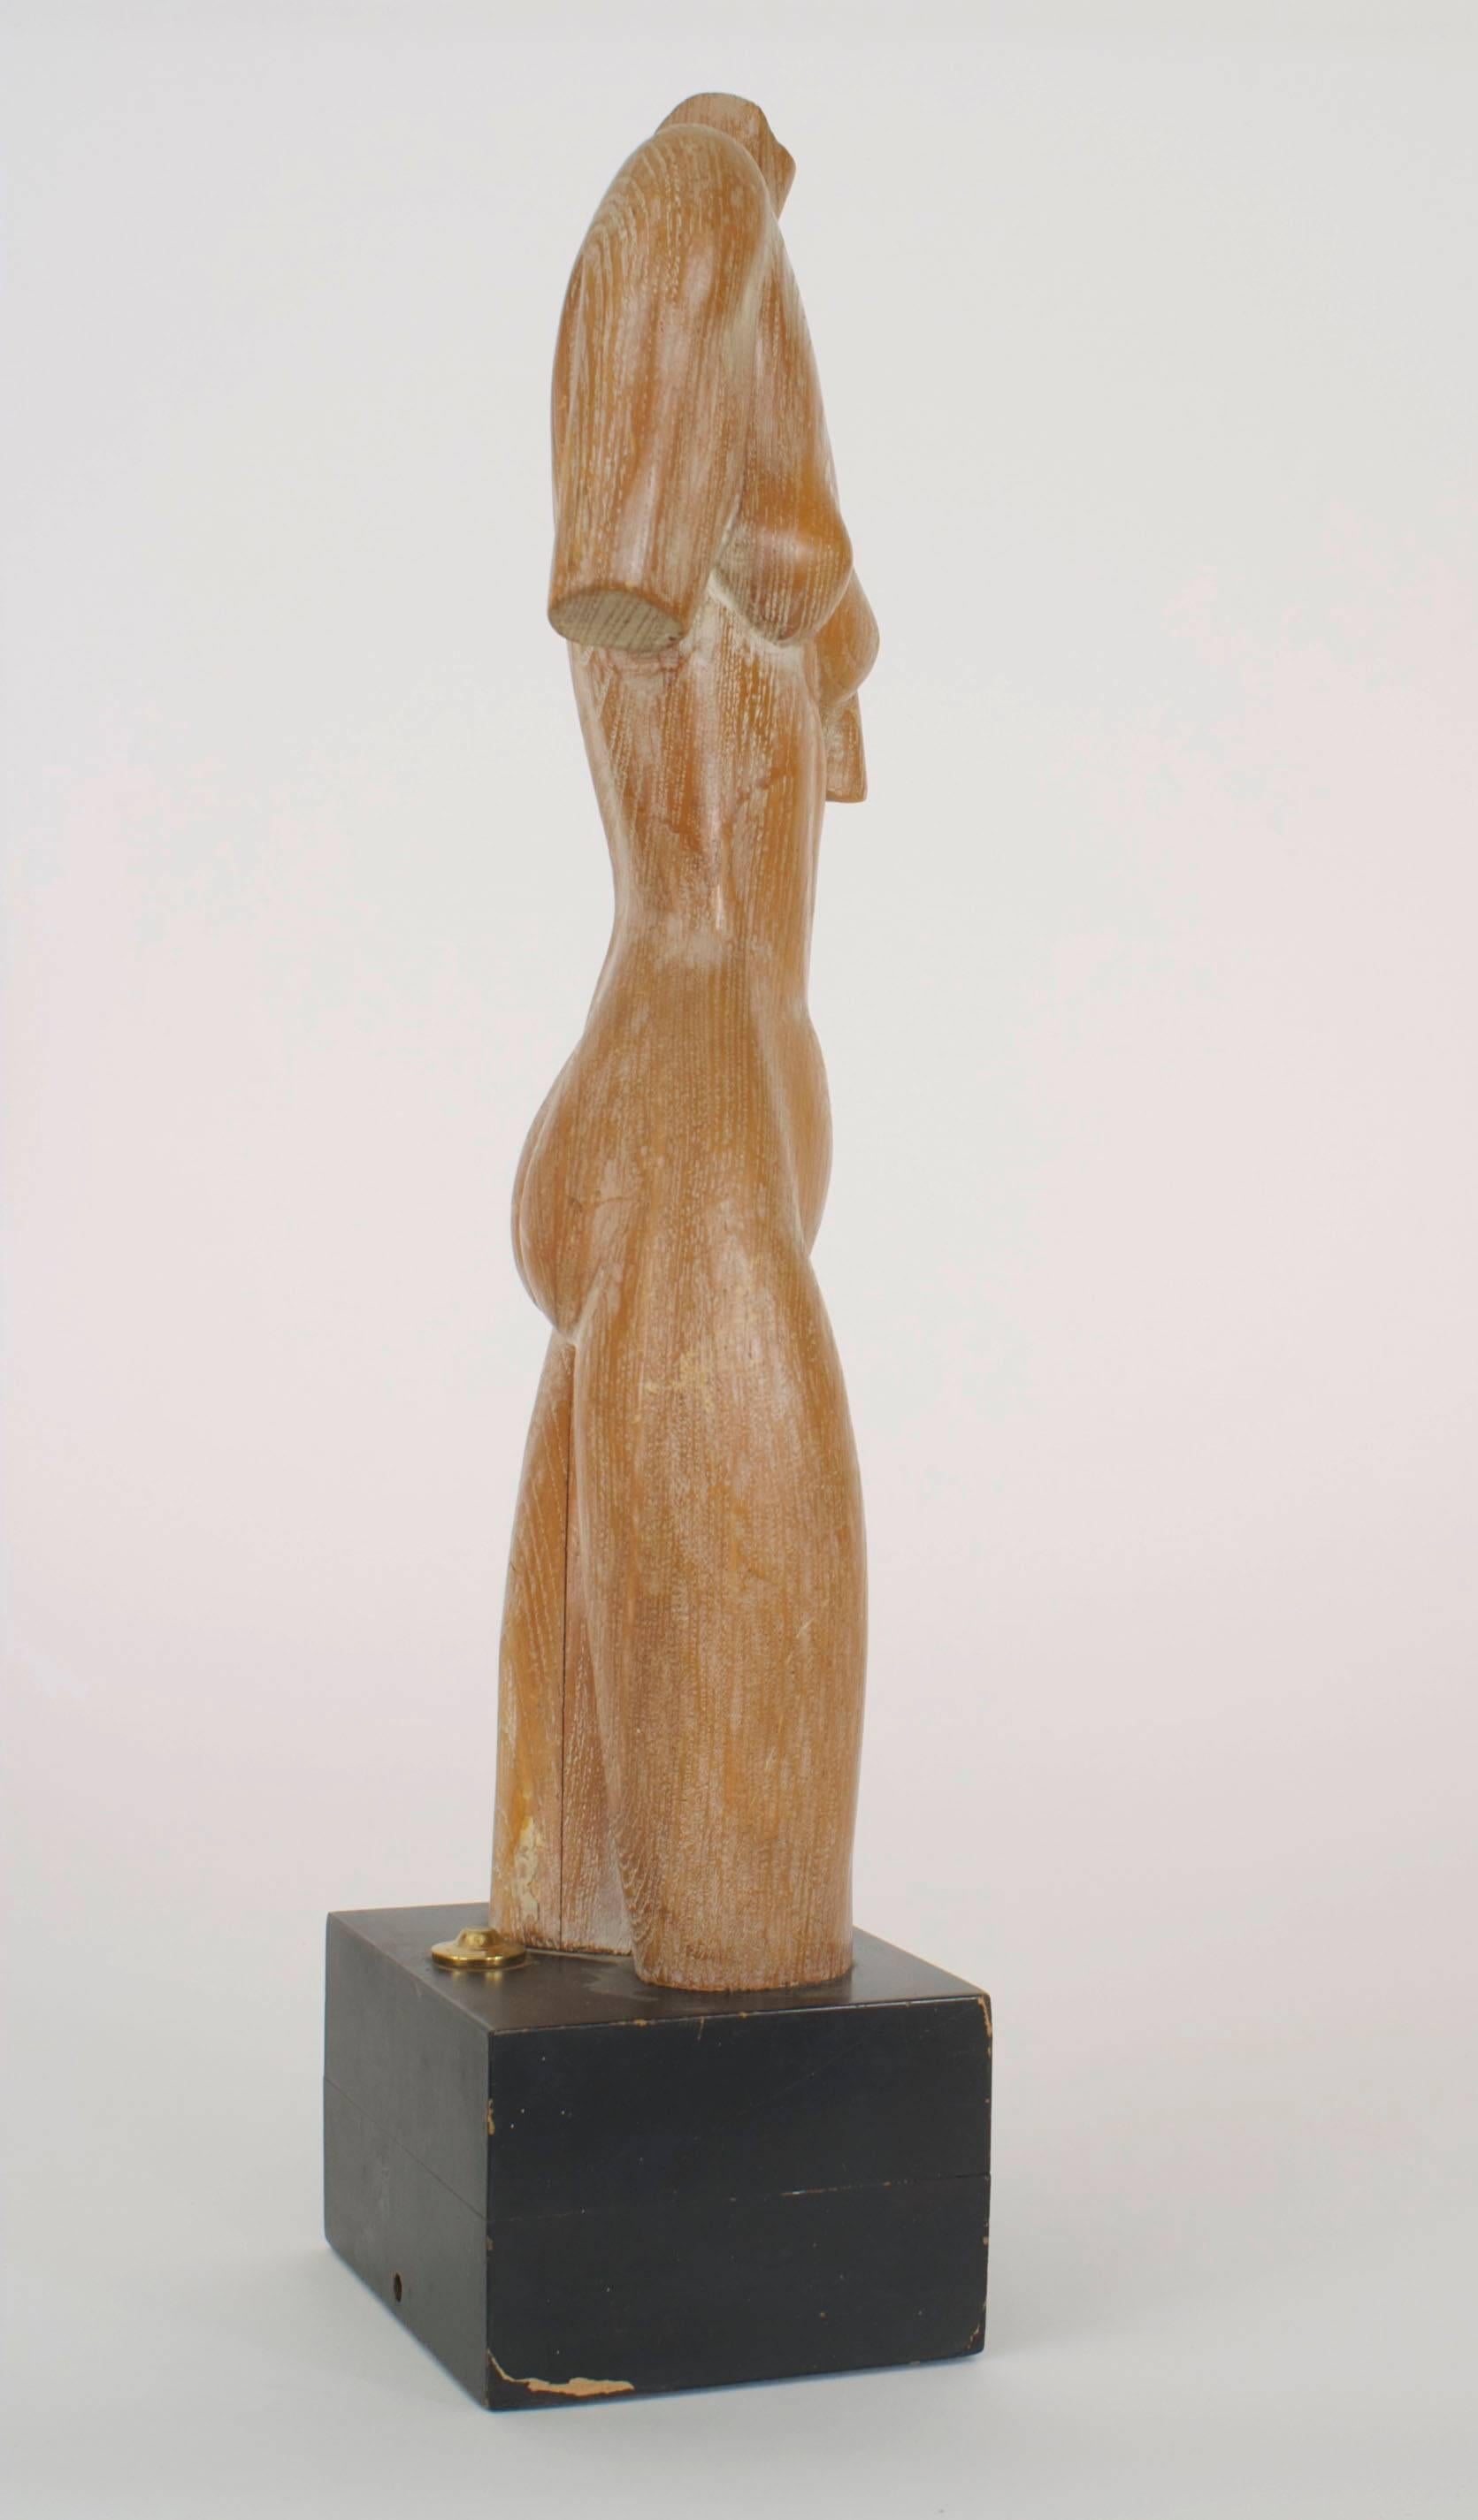 American Mid-century modern (1950s) limed oak stylized carved nude female torso mounted on an ebonized square base
